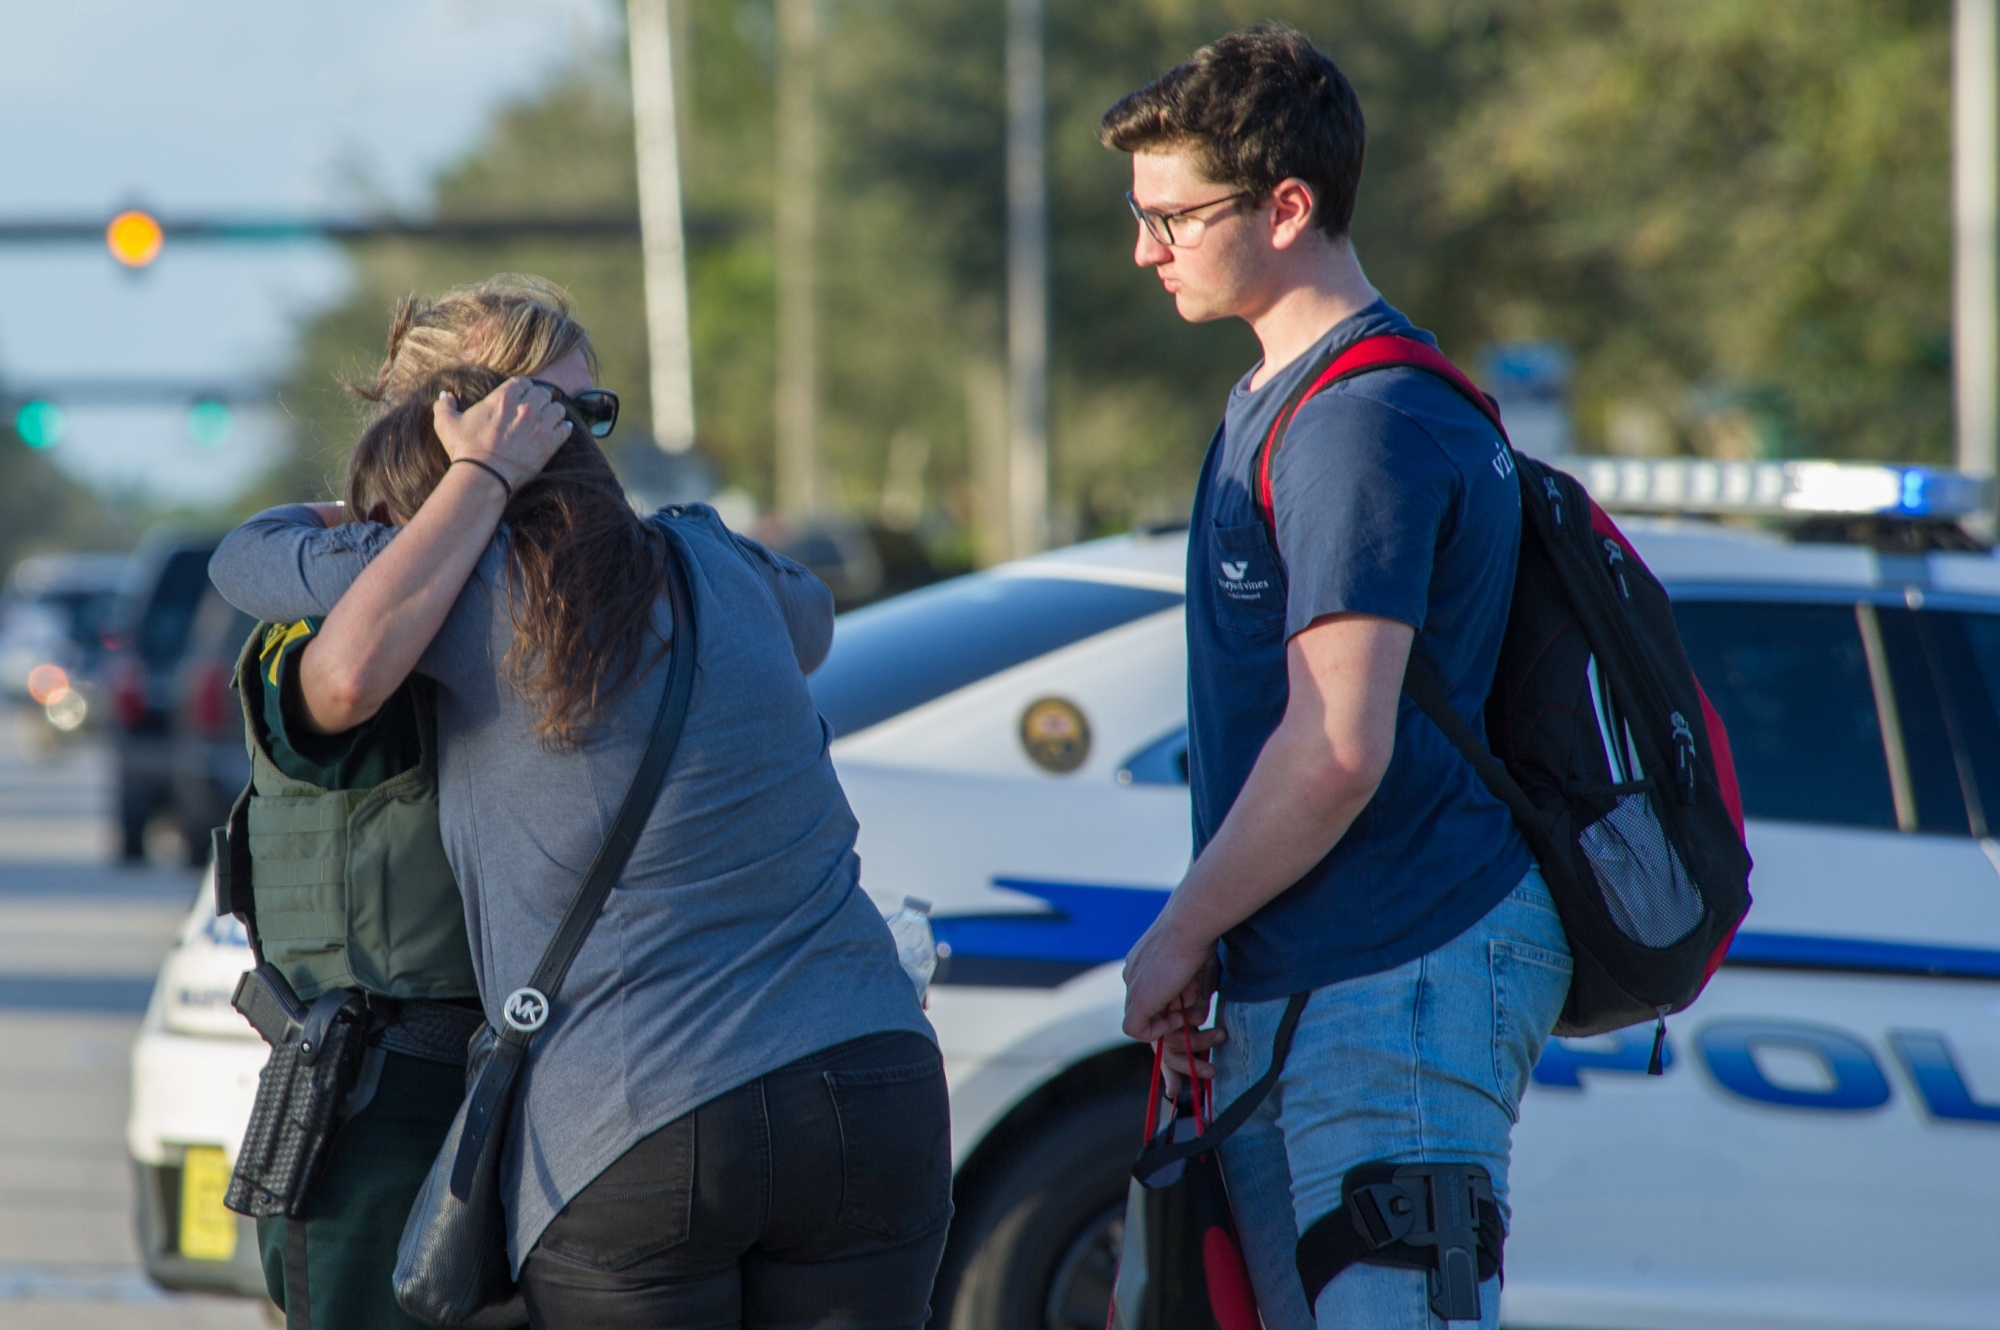 epa06525834 A woman is comforted by a police officer after a shooting at Marjory Stoneman Douglas High School in Parkland, Florida, USA, 14 February 2018. Multiple fatalities have been reported and several more injured at a high school northwest of Miami. According to law enforcement the suspect is in custody. Some media are reporting the suspect as  former student, Nicolas Cruz.  EPA/GIORGIO VIERA USA SCHOOL SHOOTING